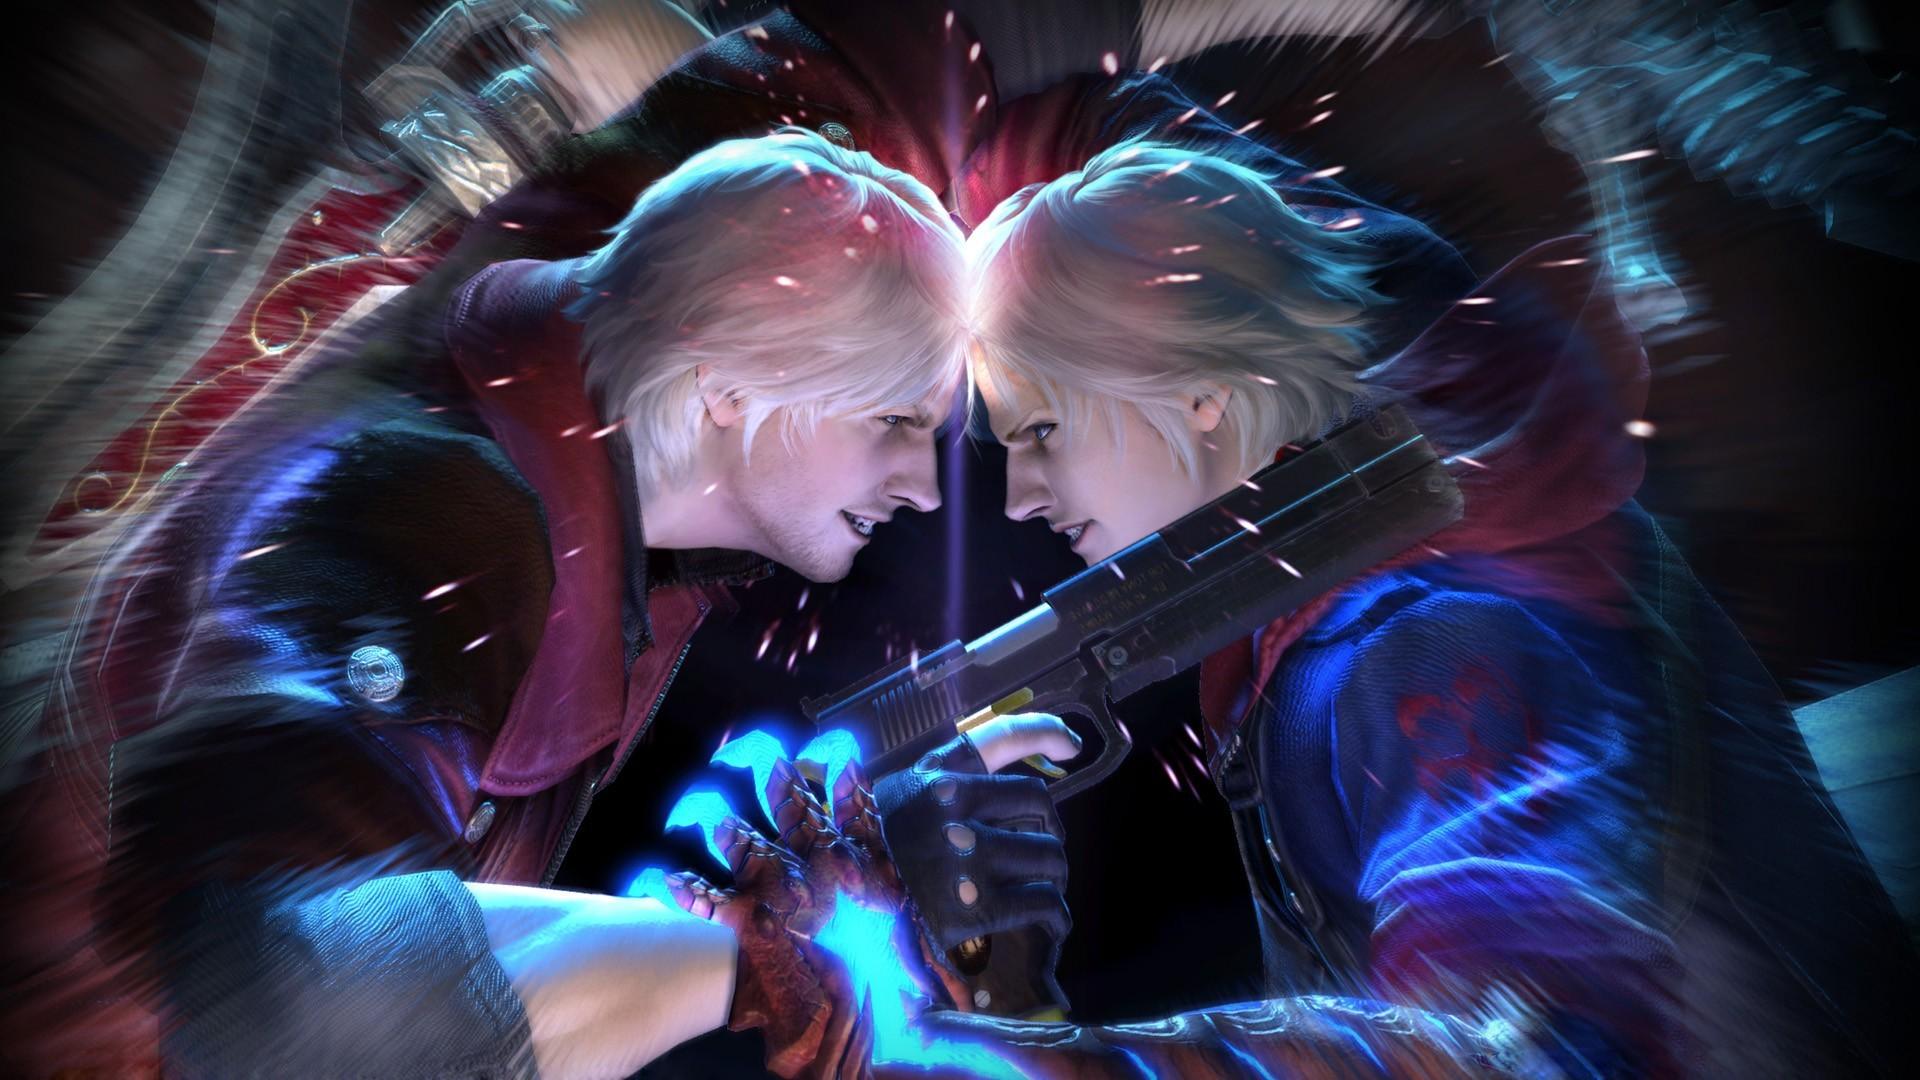 Devil May Cry 5 To Be Powered By Unreal Engine 4; PC Version To Come